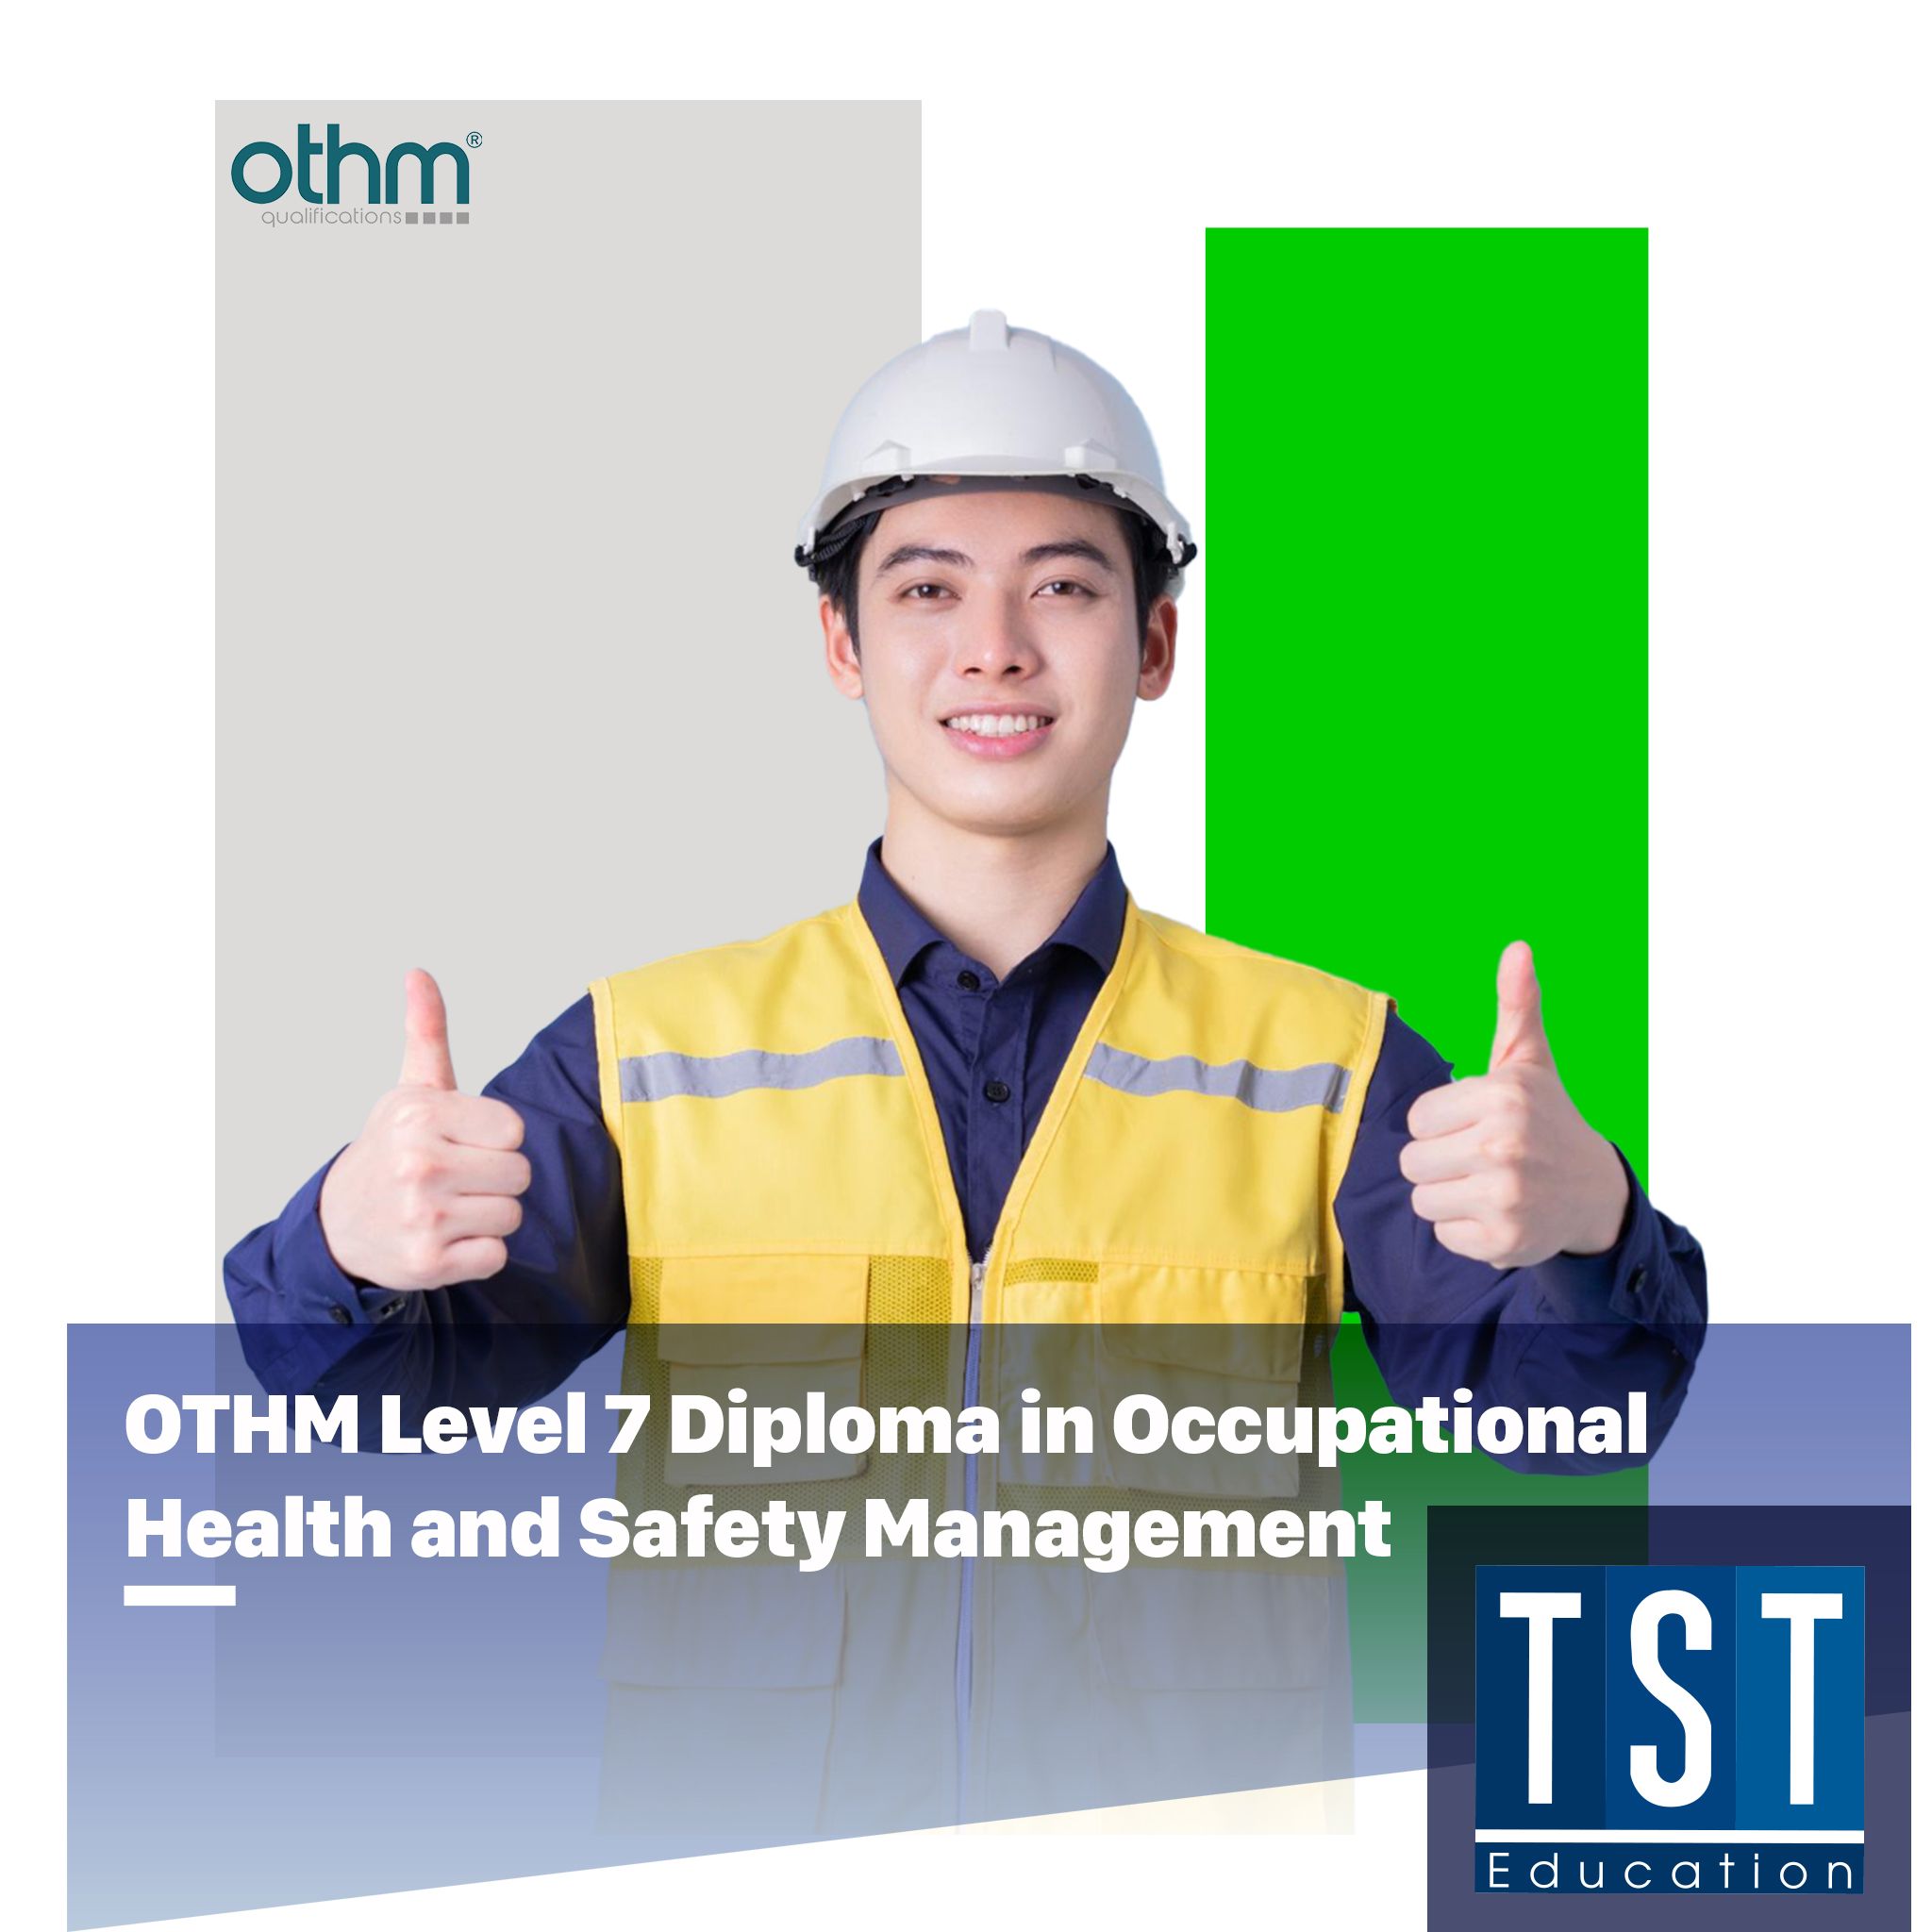  OTHM Level 7 Diploma in Occupational Health and Safety Management 